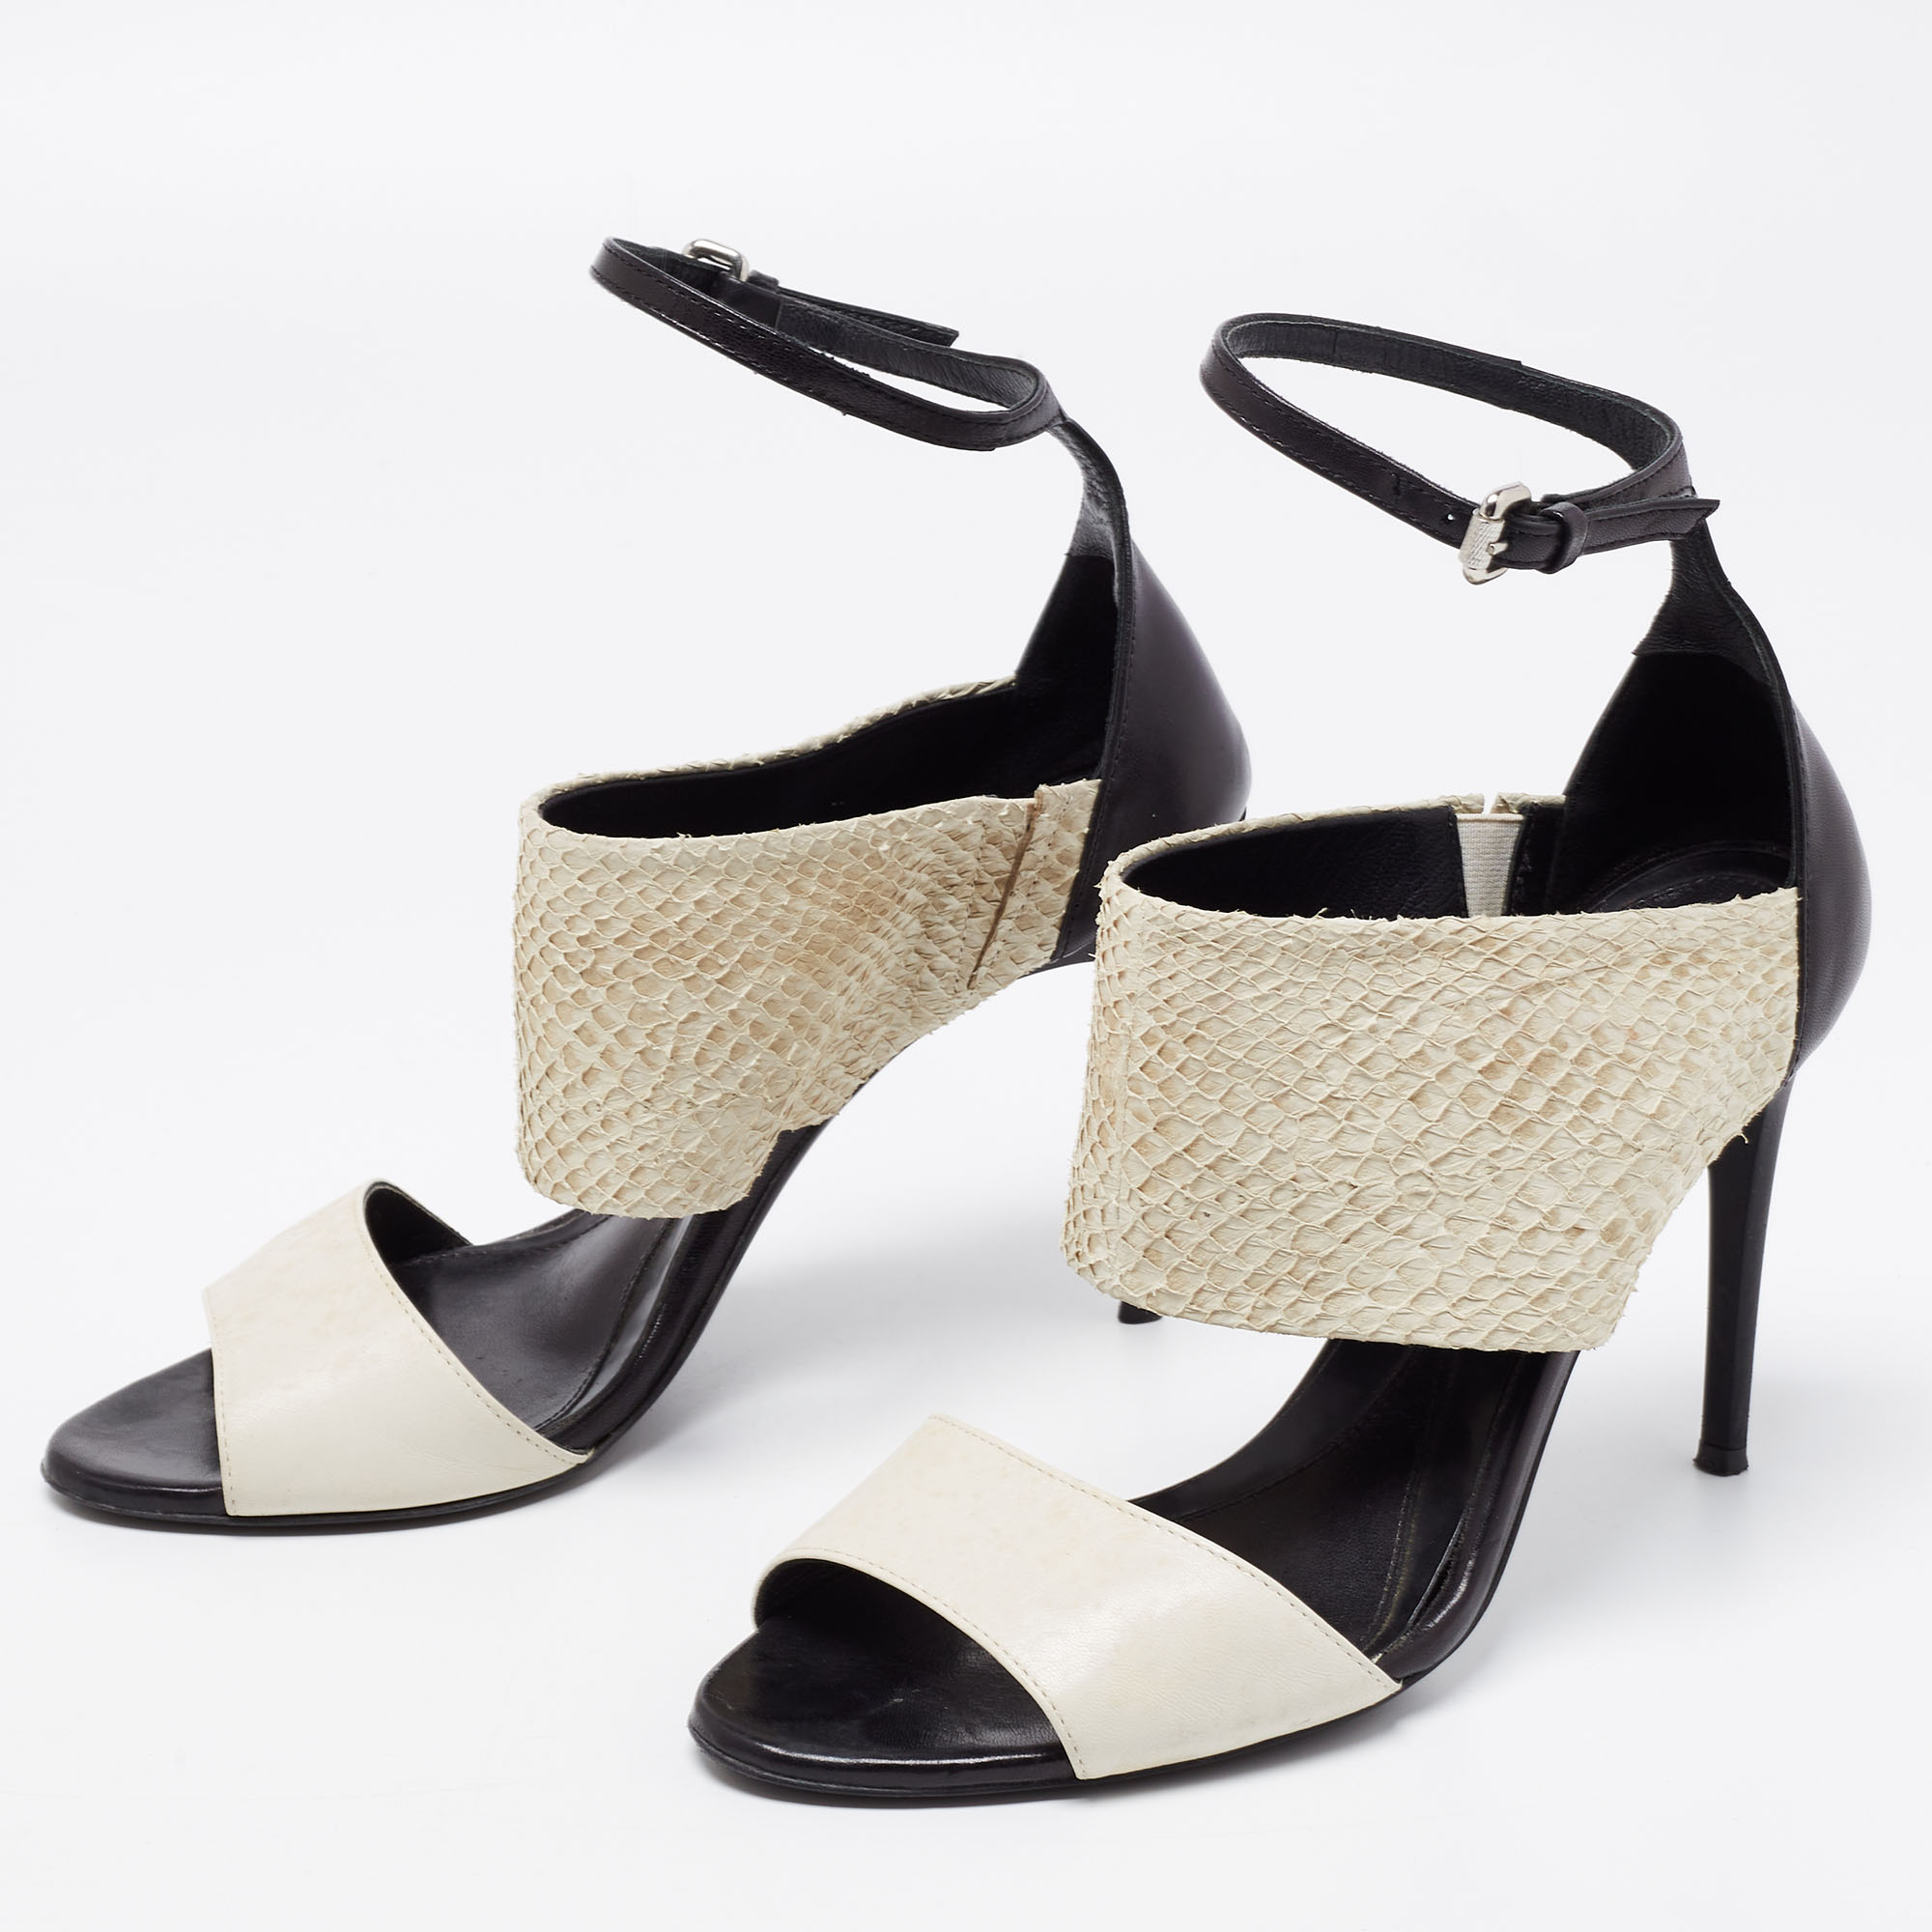 

McQ by Alexander McQueen Off-White/Black Snakeskin And Leather Ankle Strap Sandals Size